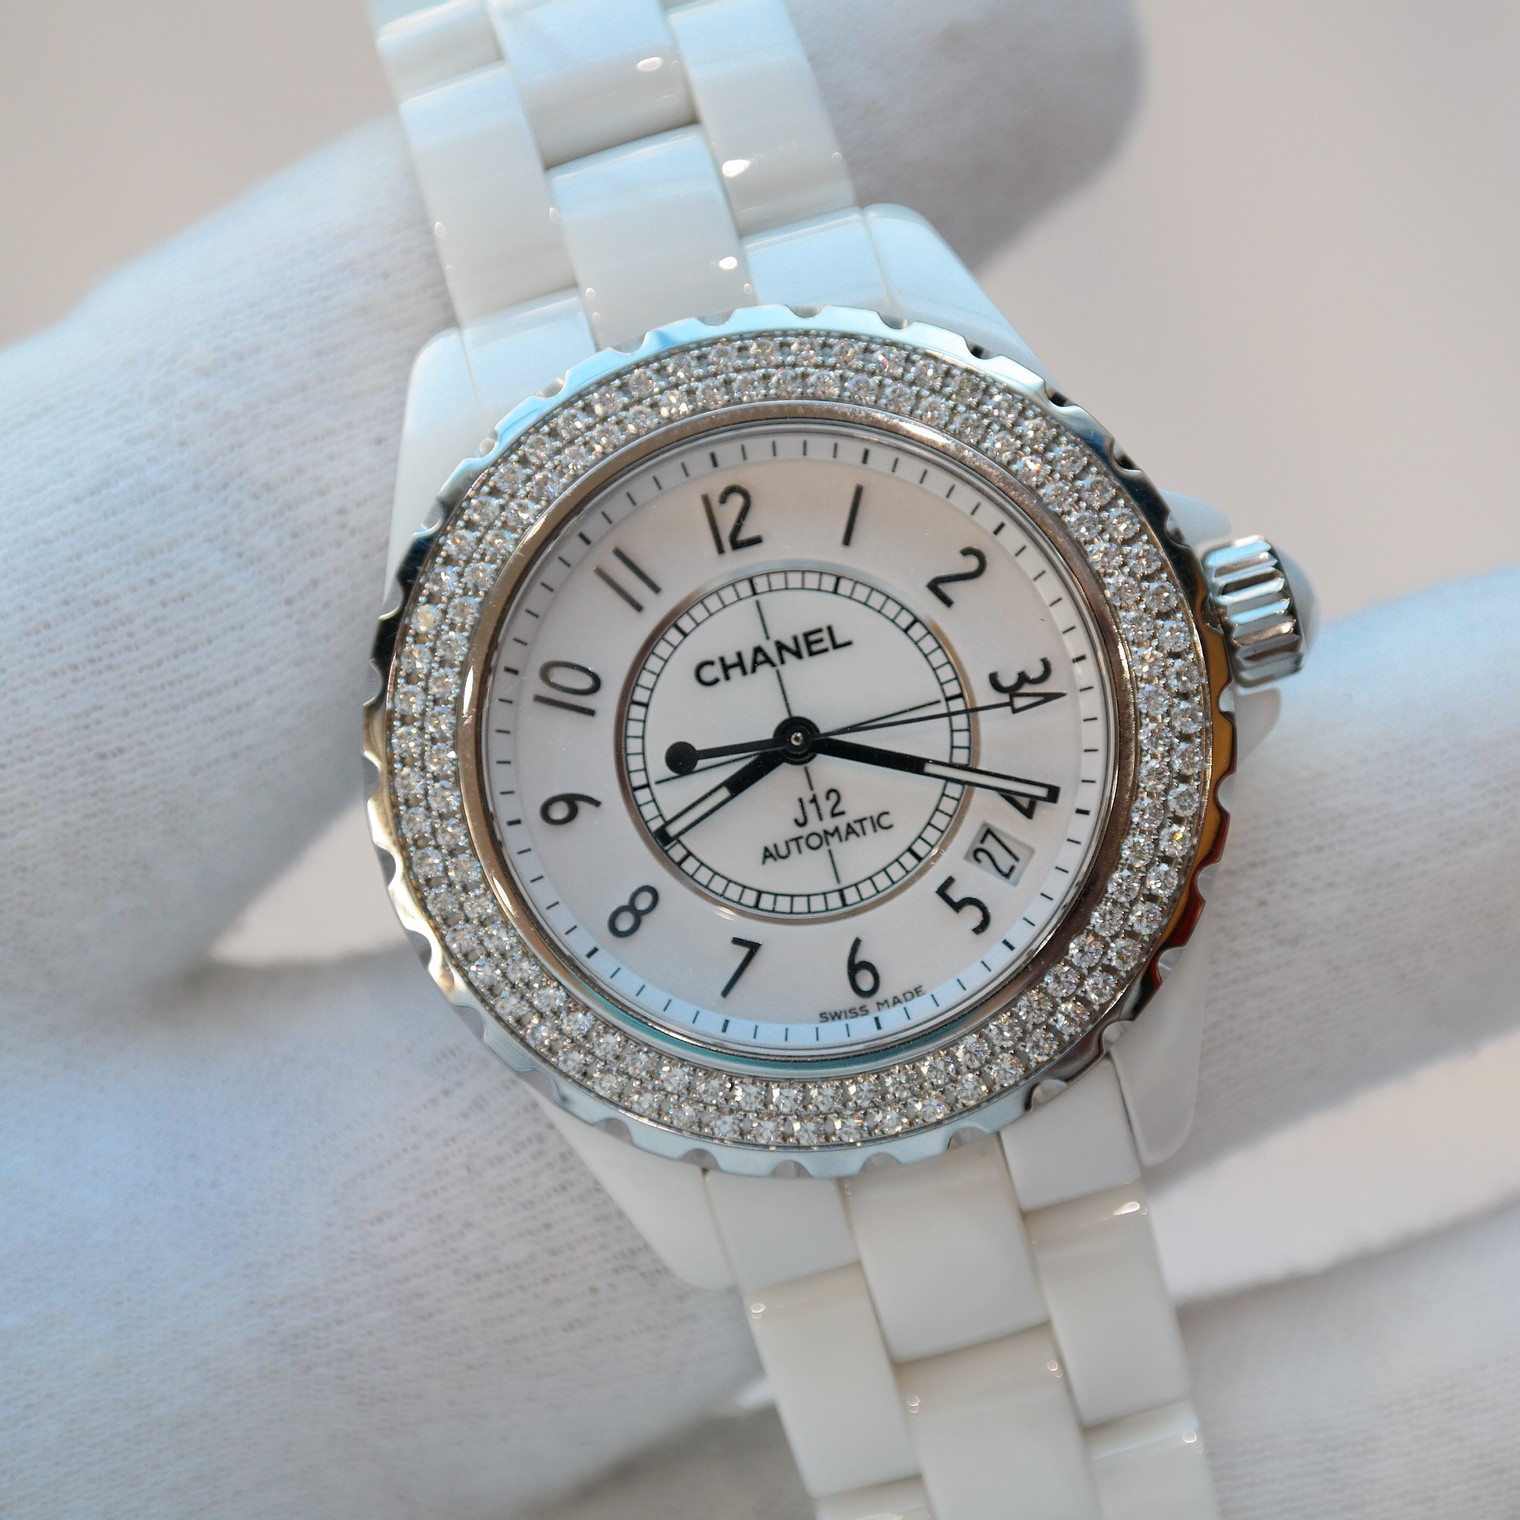 Chanel J12 Automatic 38mm Ladies Watch